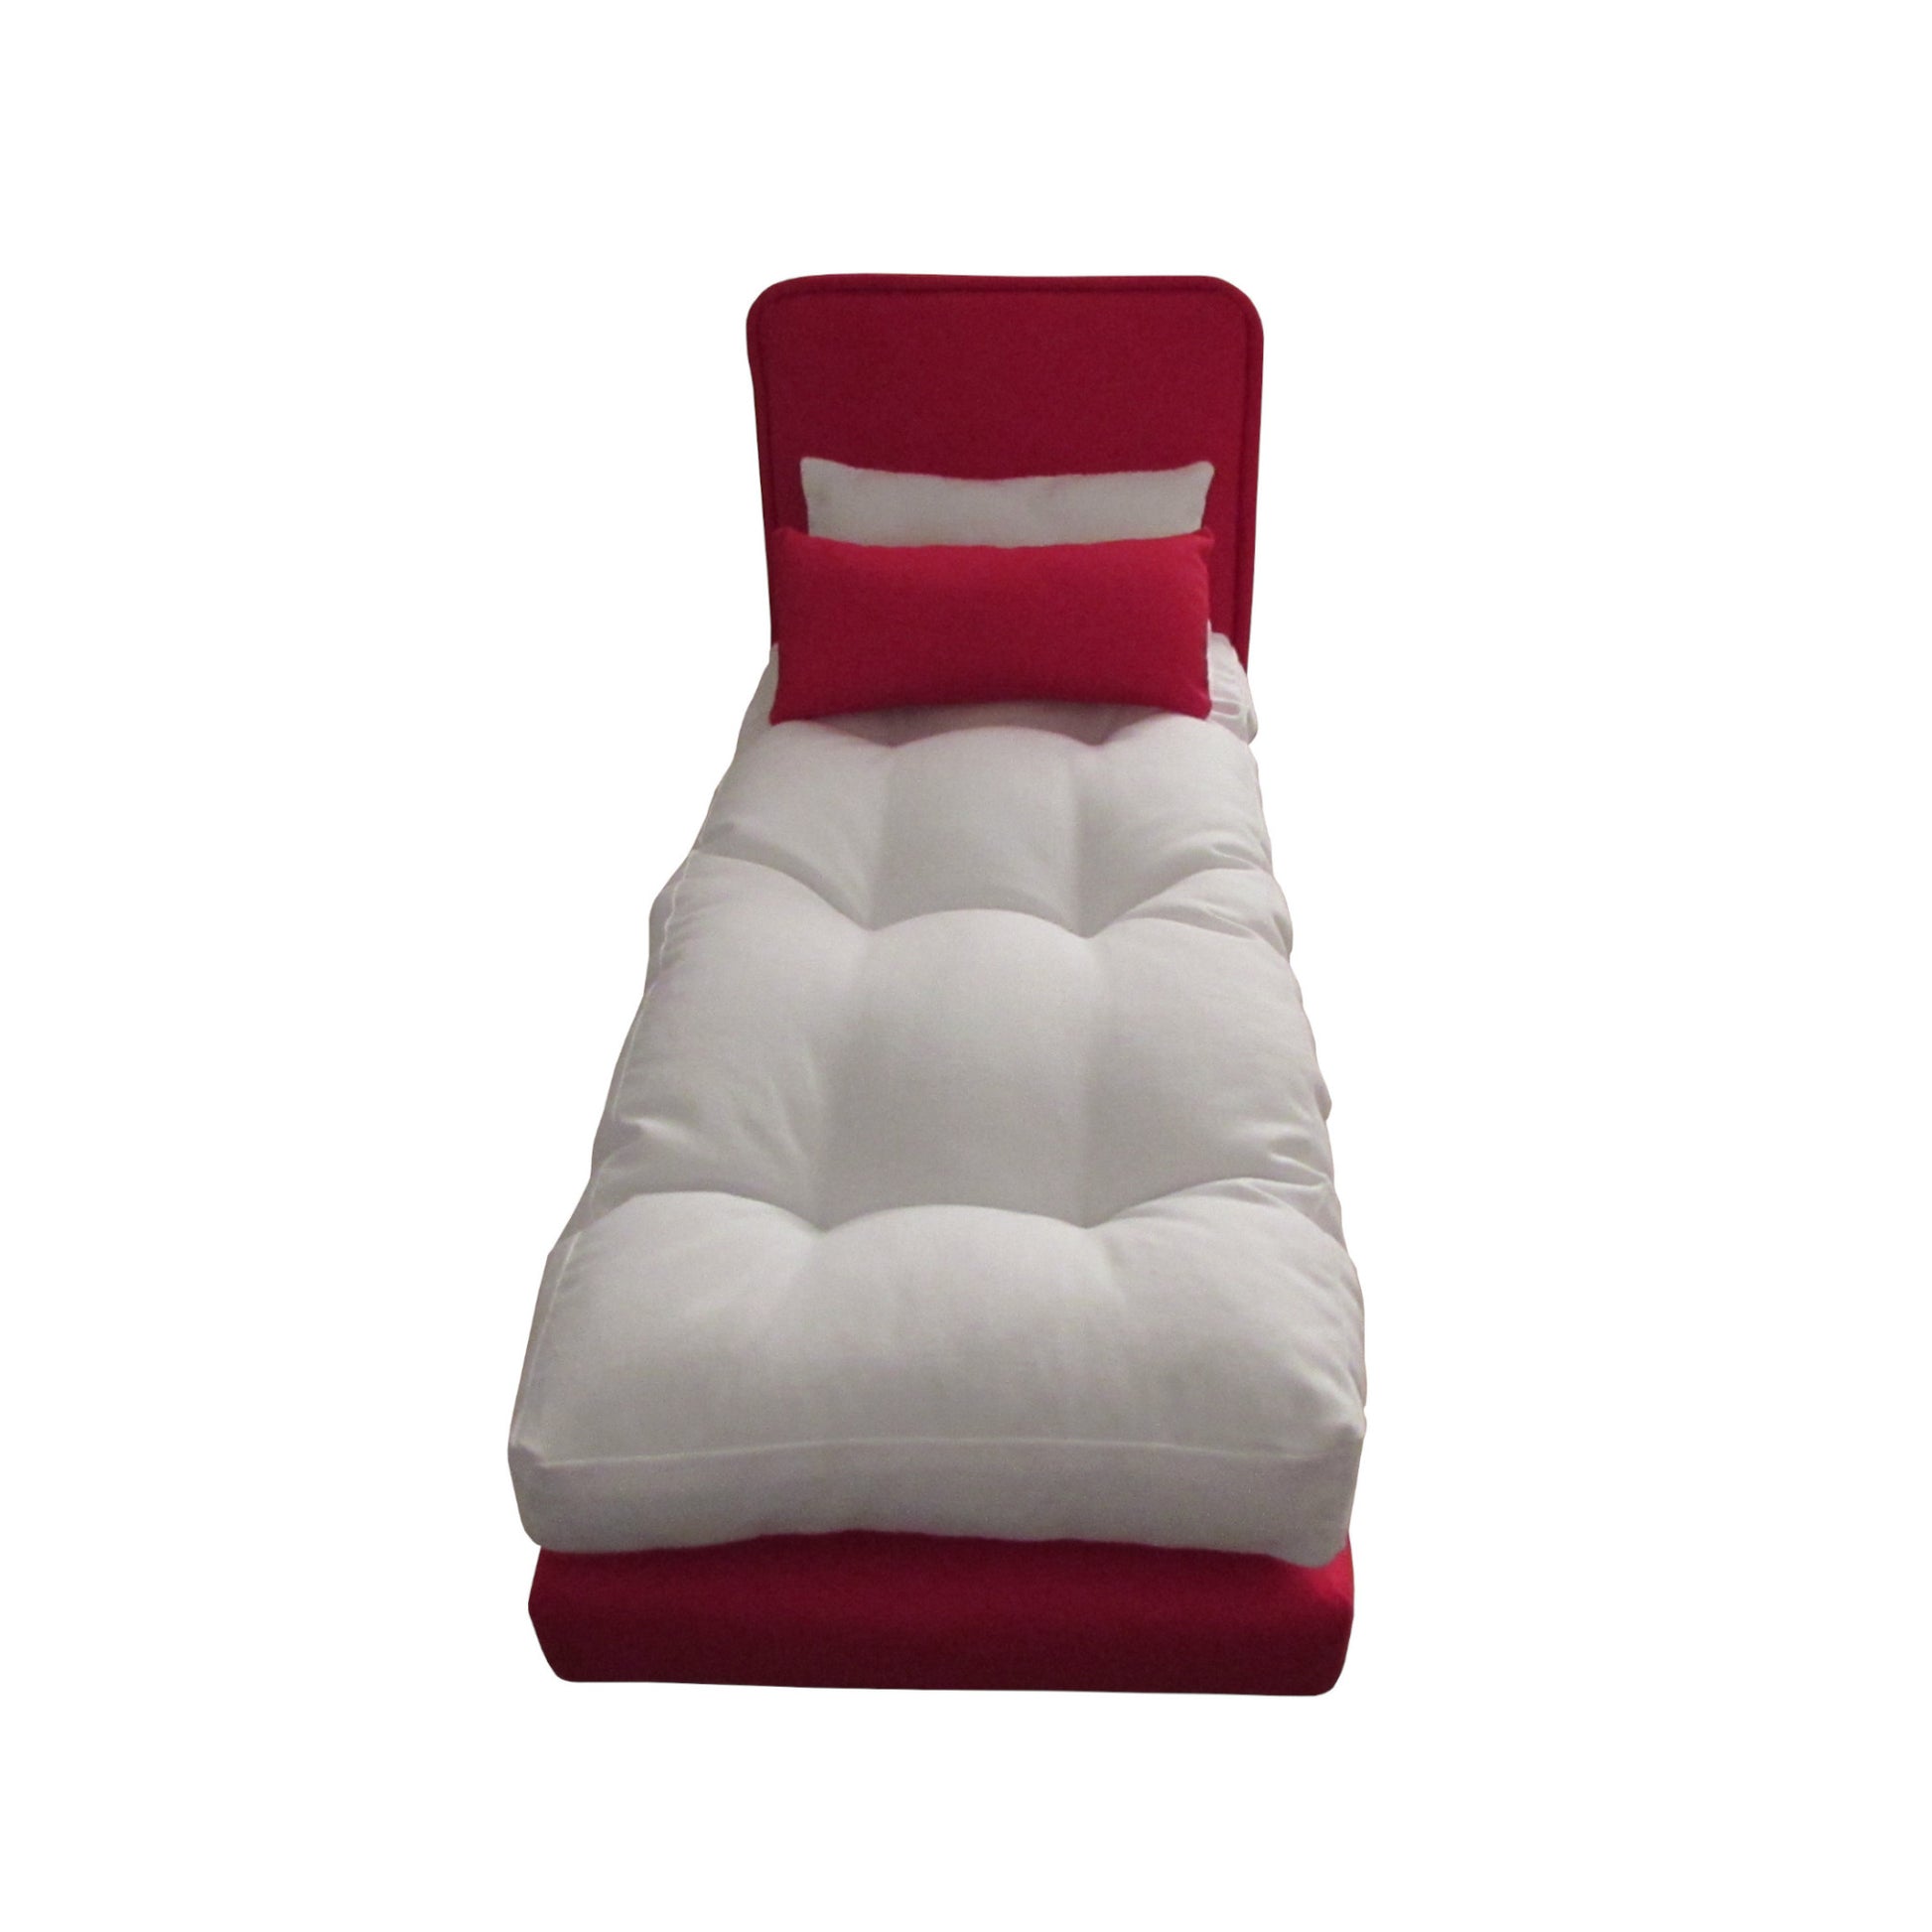 Upholstered Red Doll Bed for 11 1/2-inch and 12-inch dolls Third View